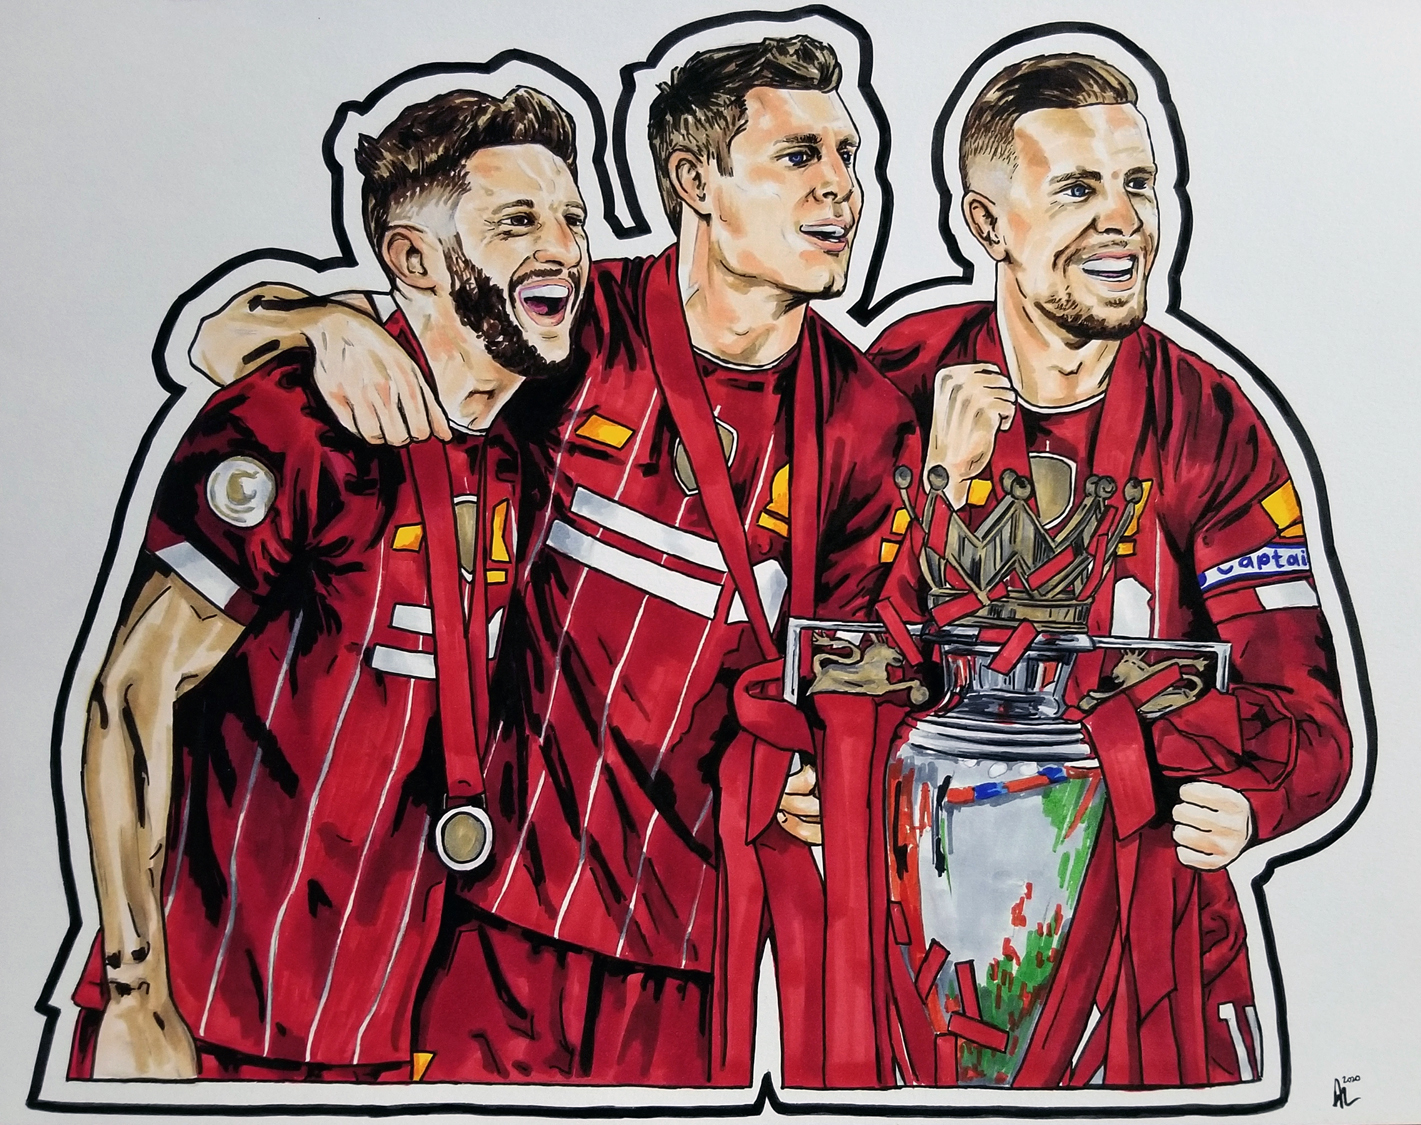 Lallana, Milner, and Henderson celebrate Premier League win with trophy. Pen and ink on paper.